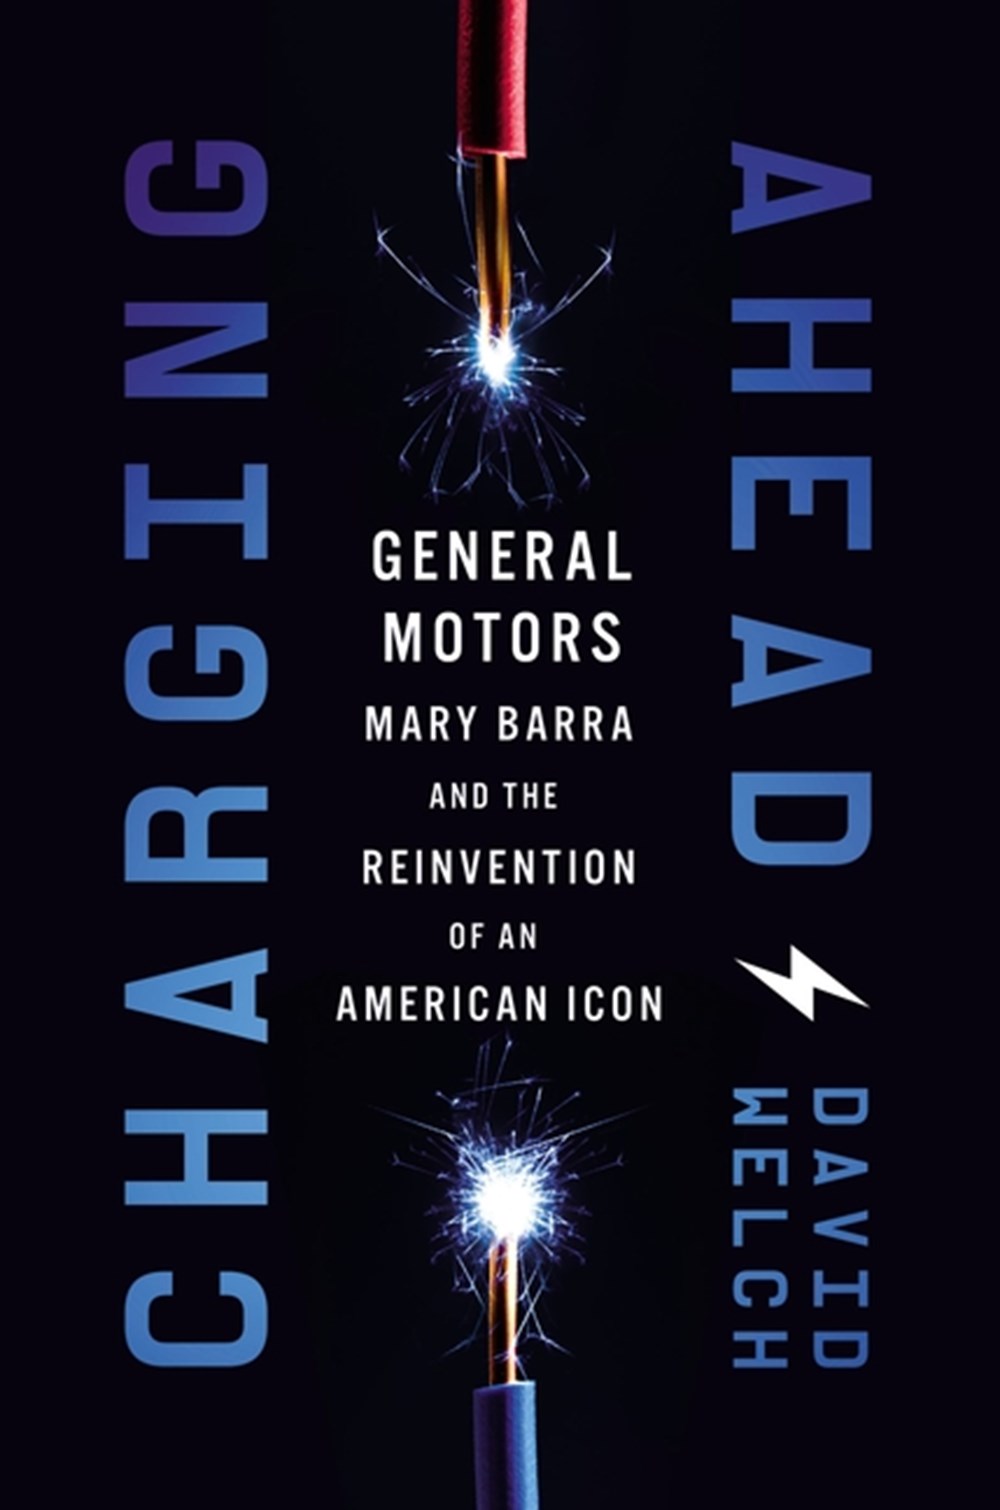 Charging Ahead: Gm, Mary Barra, and the Reinvention of an American Icon